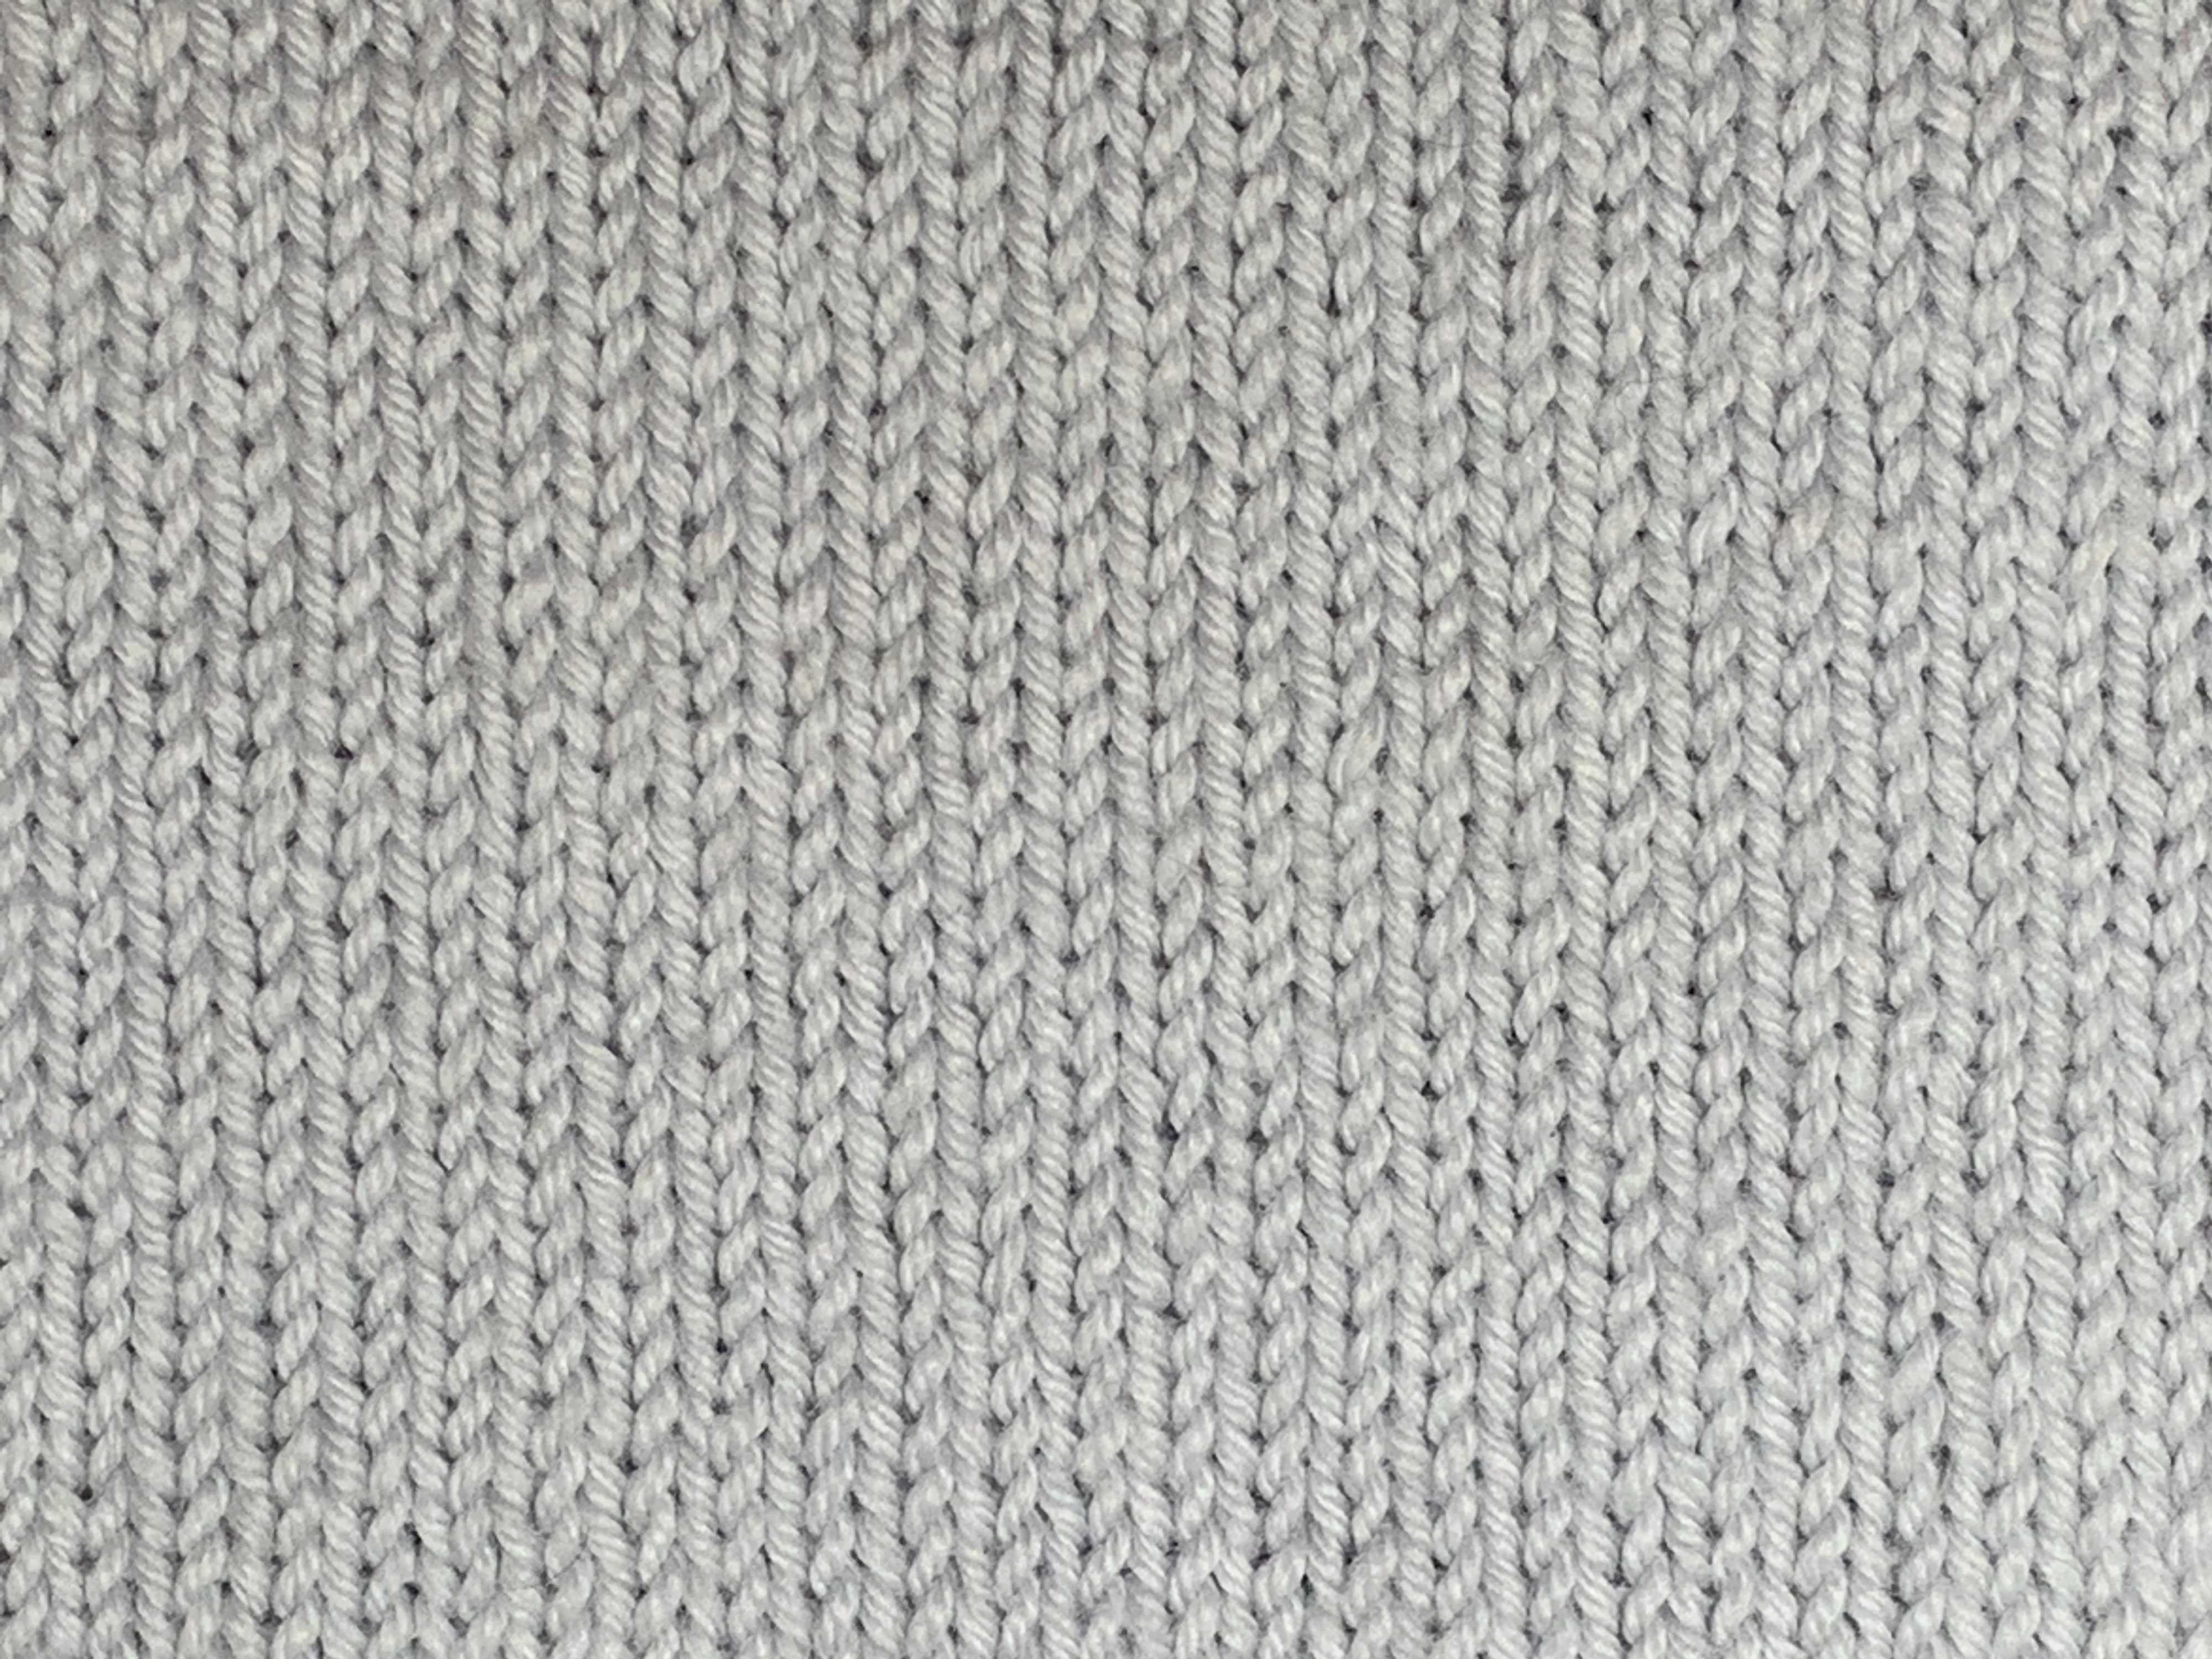 The right side of stockinette, characterized by rows of “V” shaped knit stitches.